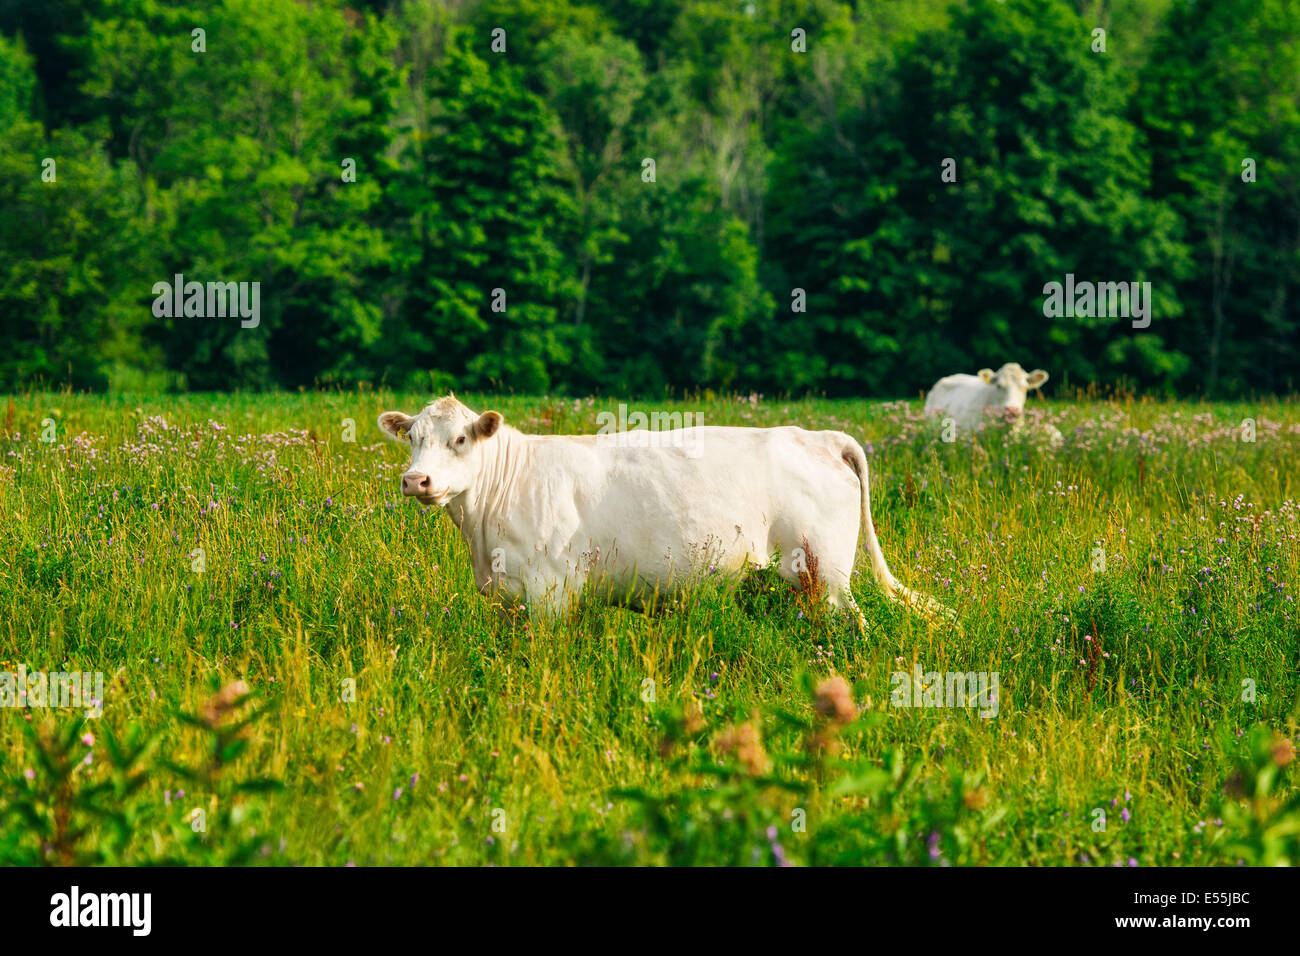 White Cow in Field of Tall Grass Stock Photo